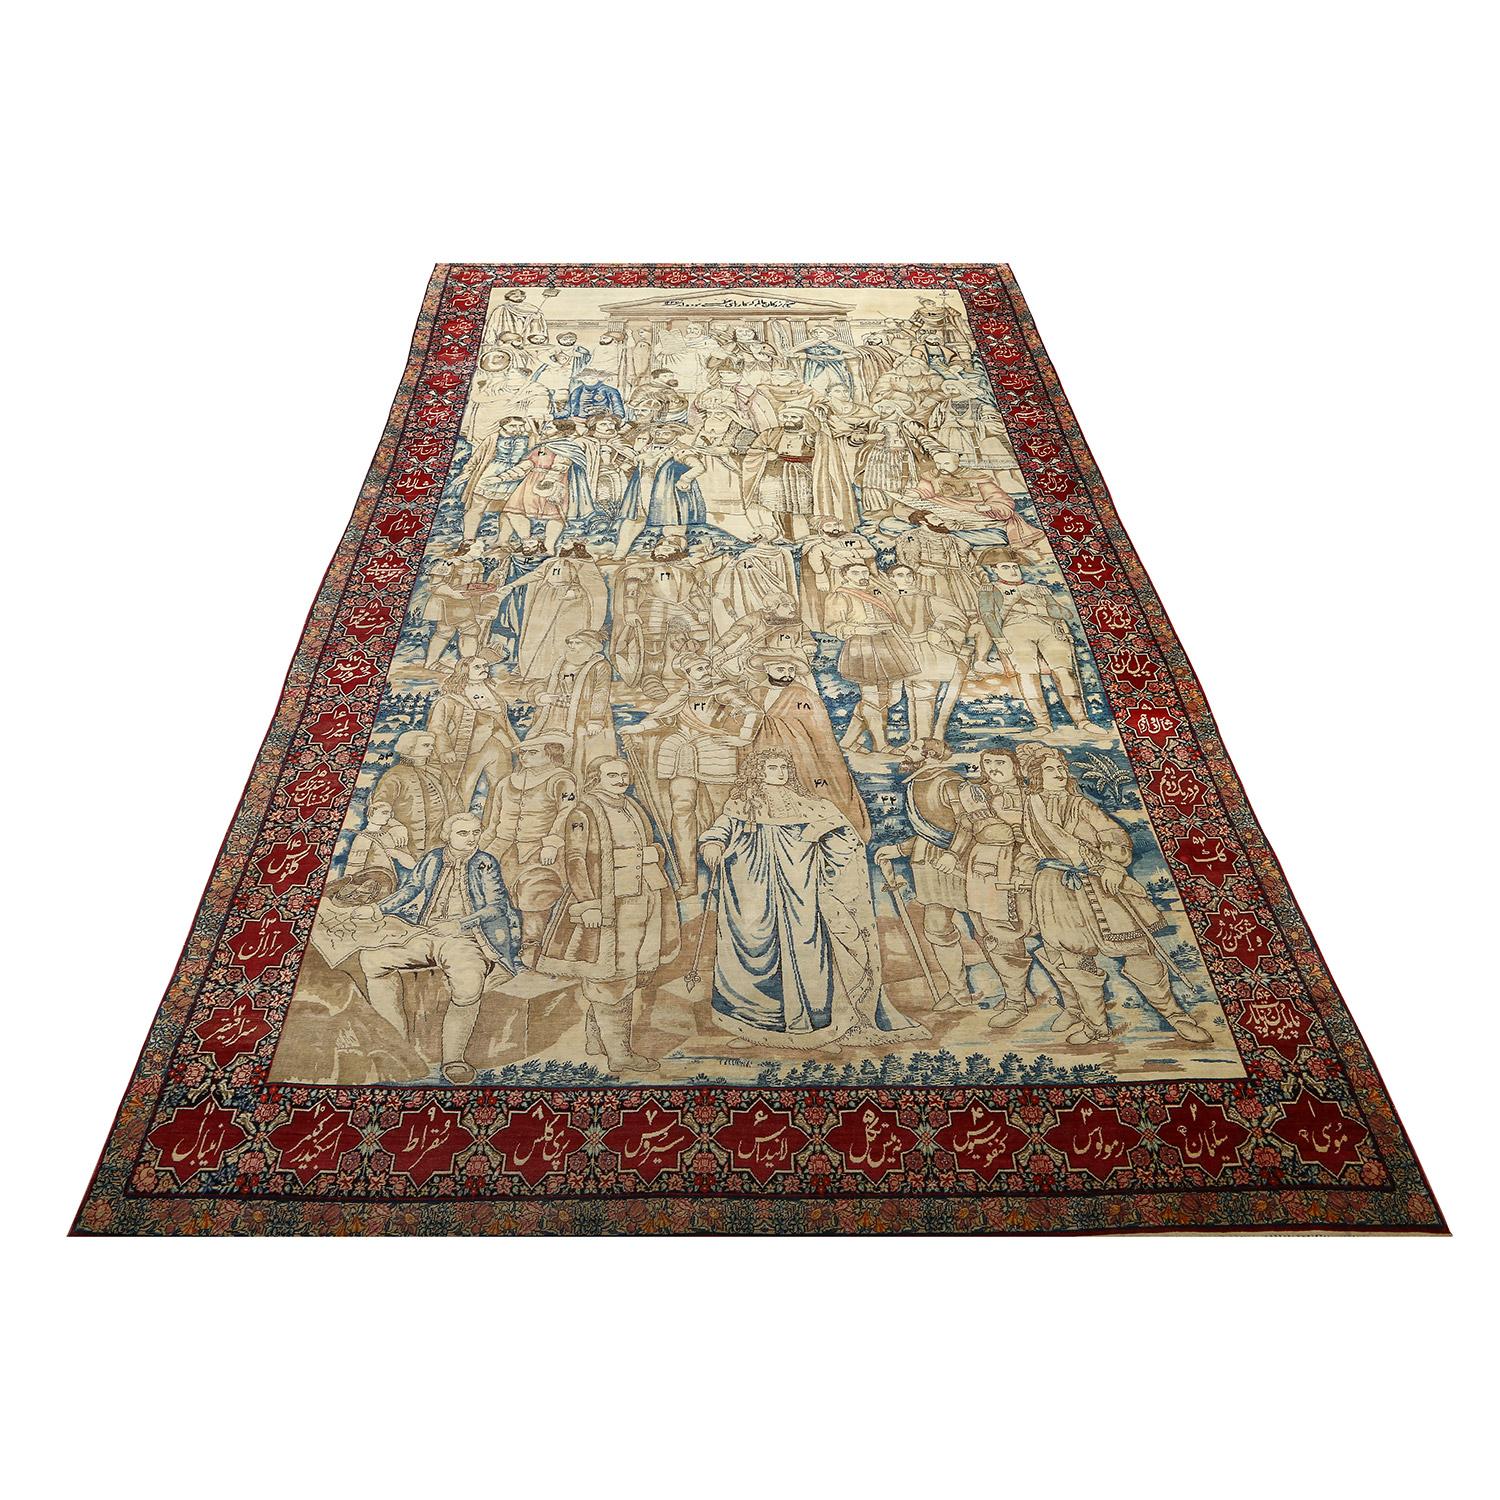 These Antique Lavar Rugs, each measuring 8 feet by 5 feet, are an exquisite embodiment of Persian craftsmanship and storytelling. Crafted with precision, they feature woolen compositions supported by sturdy cotton foundations, offering a harmonious